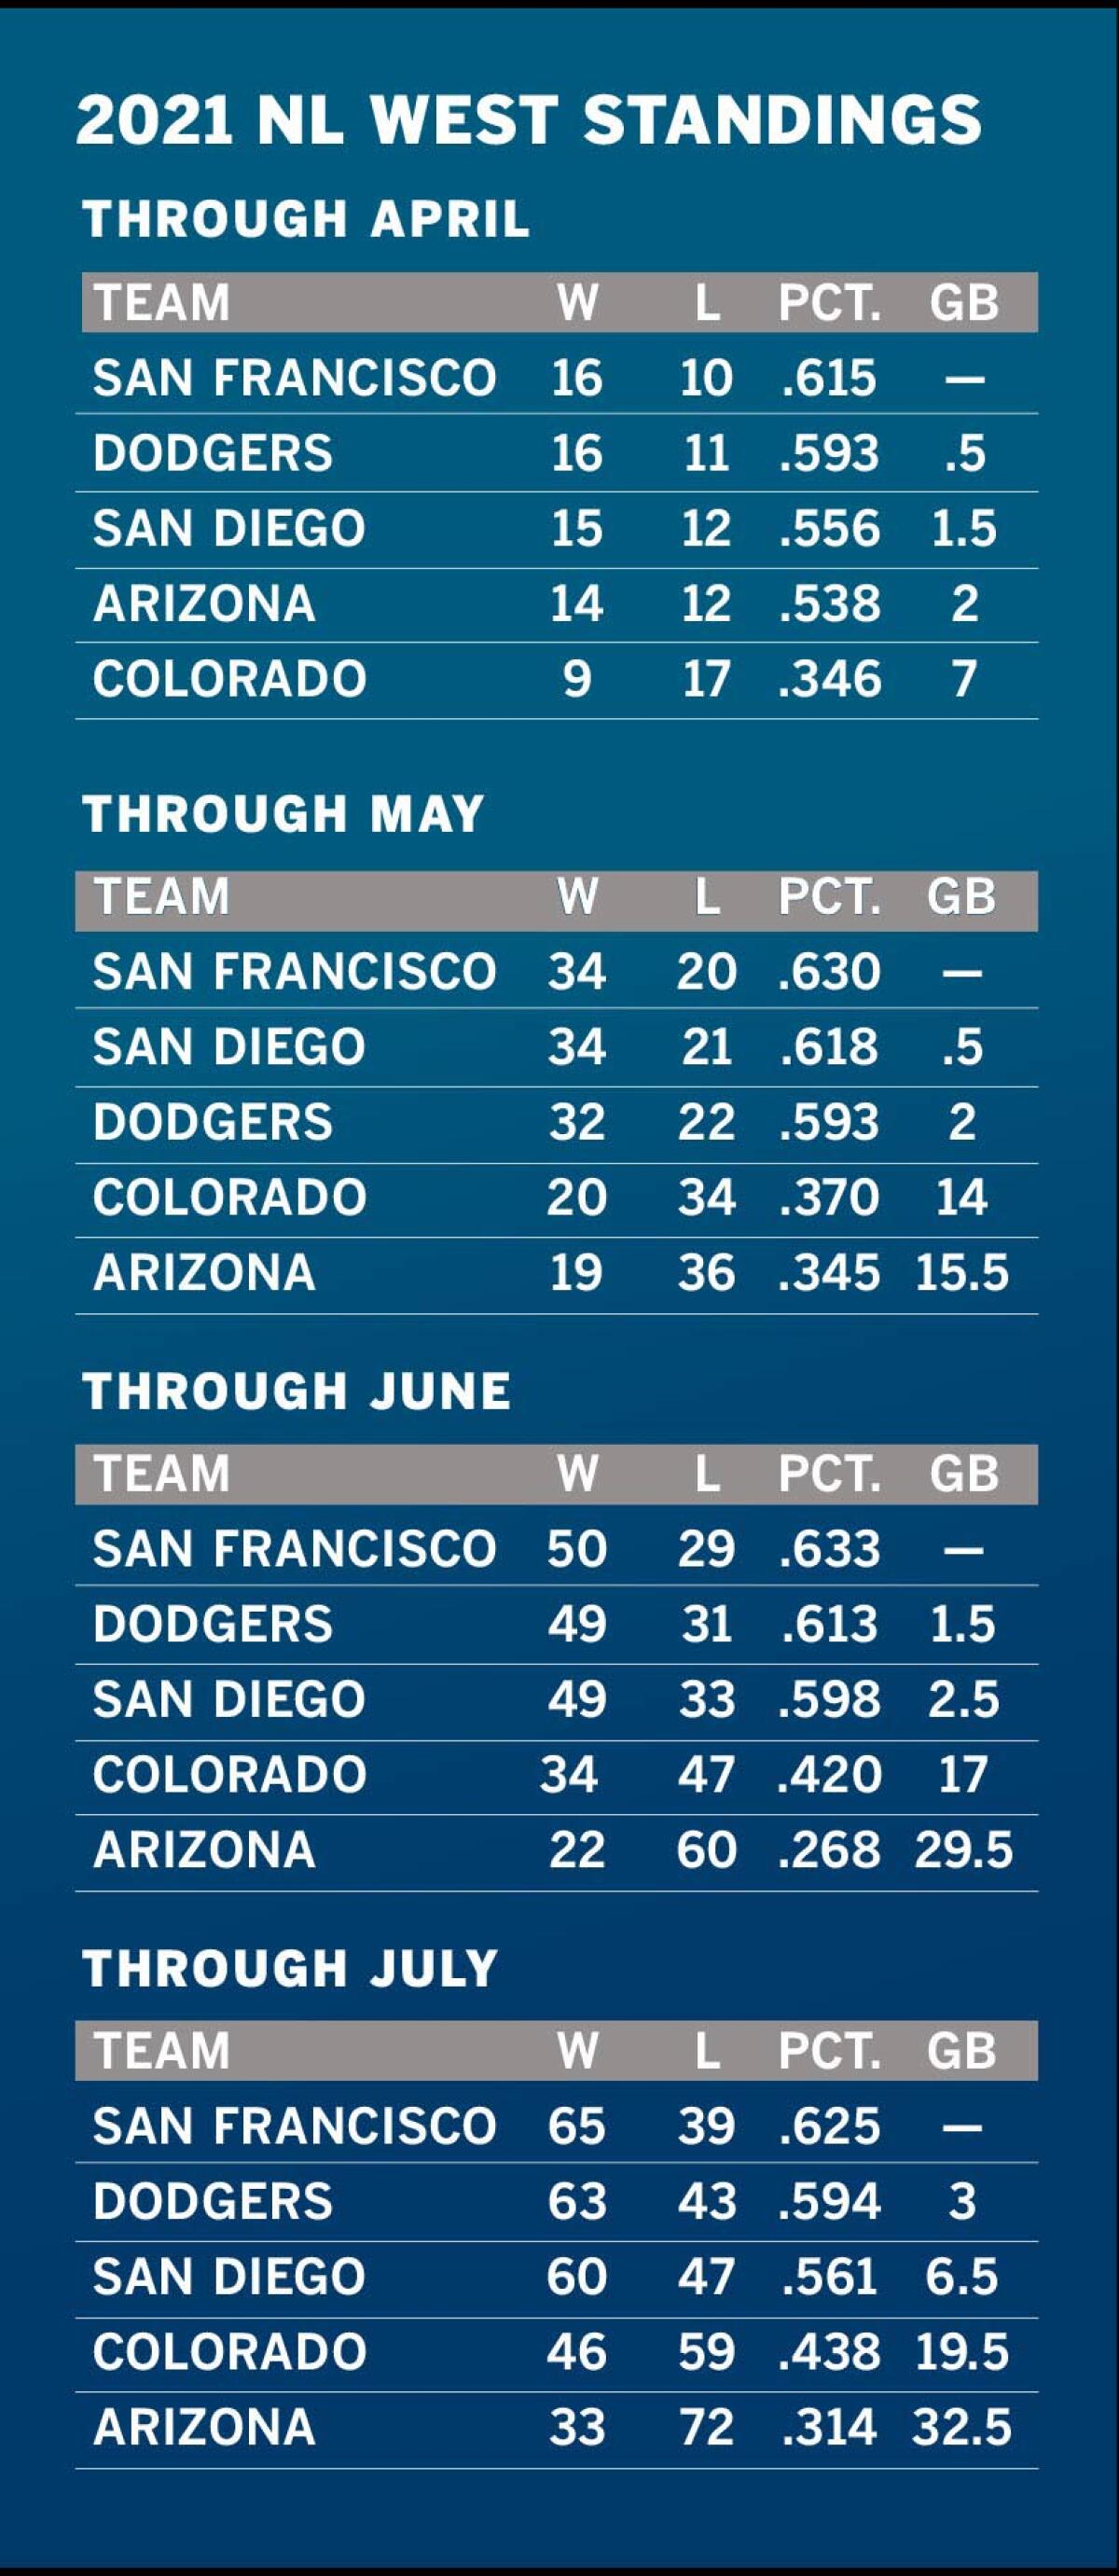 NL West standings month by month this season.